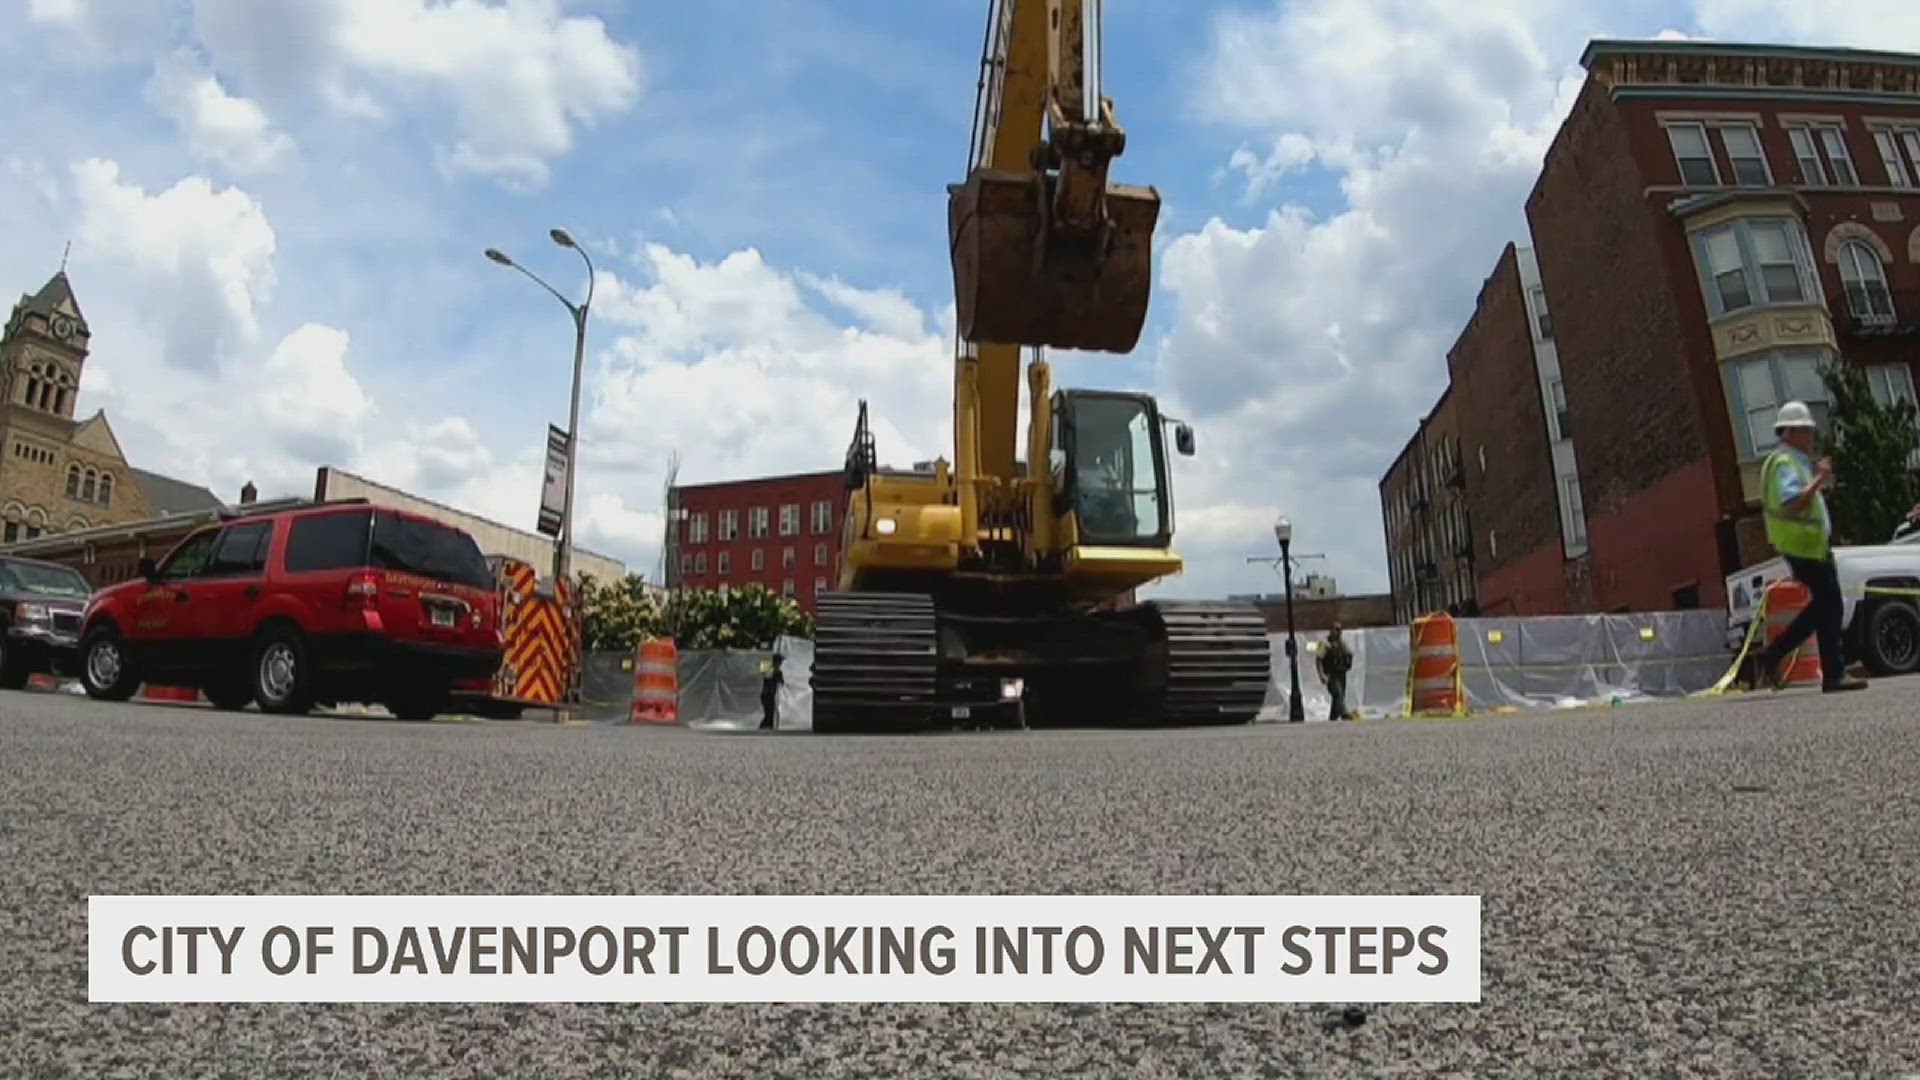 On Thursday, four days after the Davenport building collapse, city officials said they've located two of the five previously unaccounted for residents.